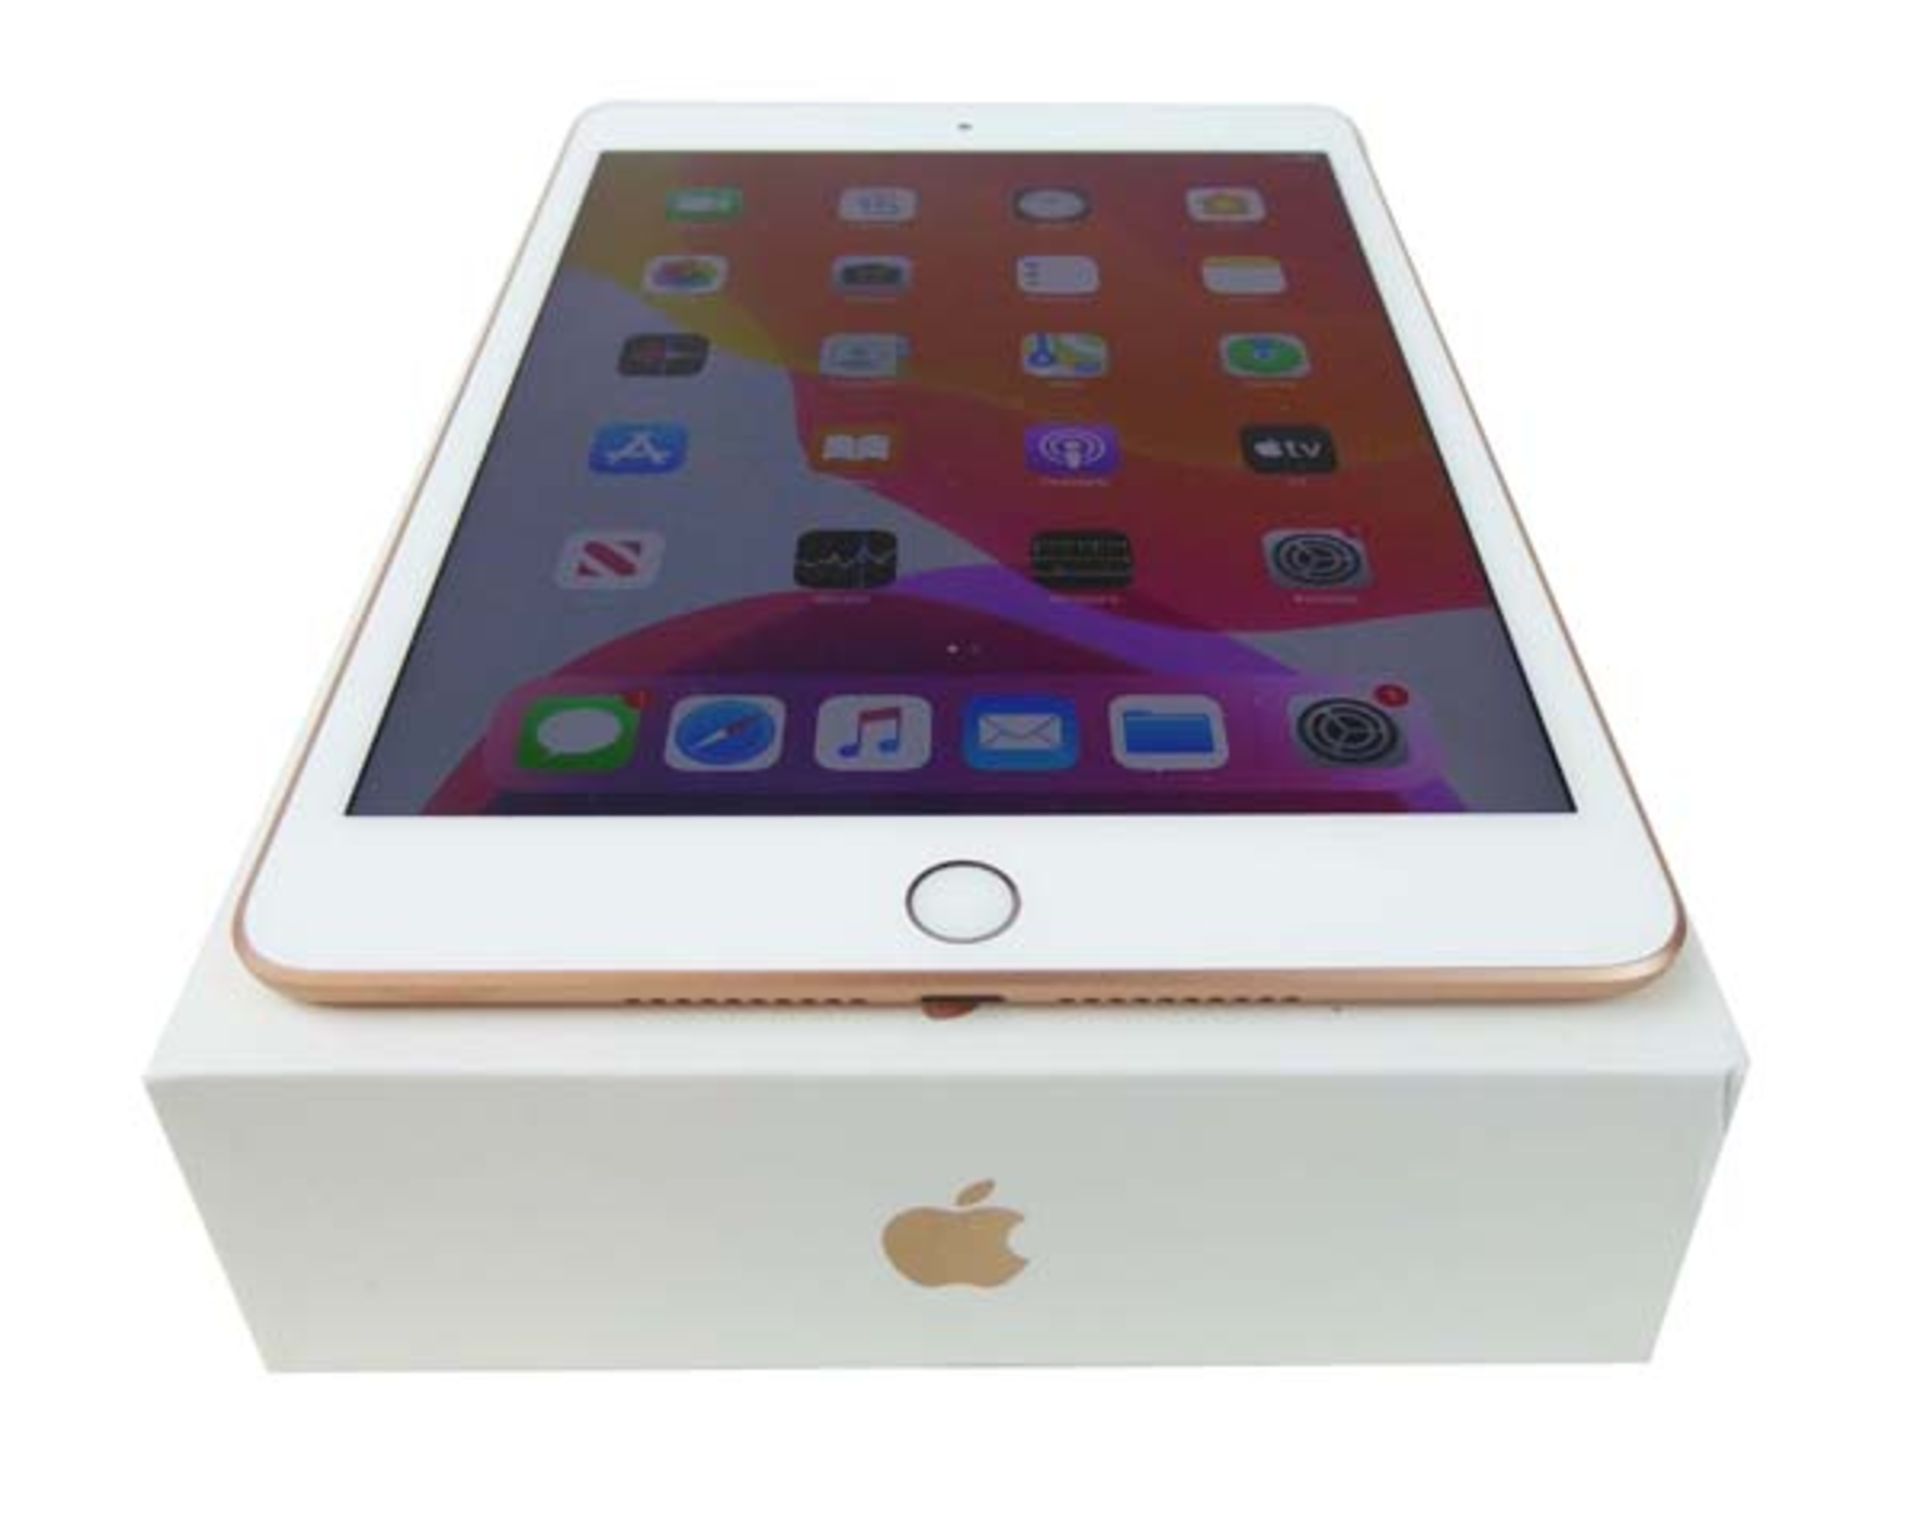 iPad Mini 64GB Gold tablet with box (A2133 2019) - Image 2 of 3